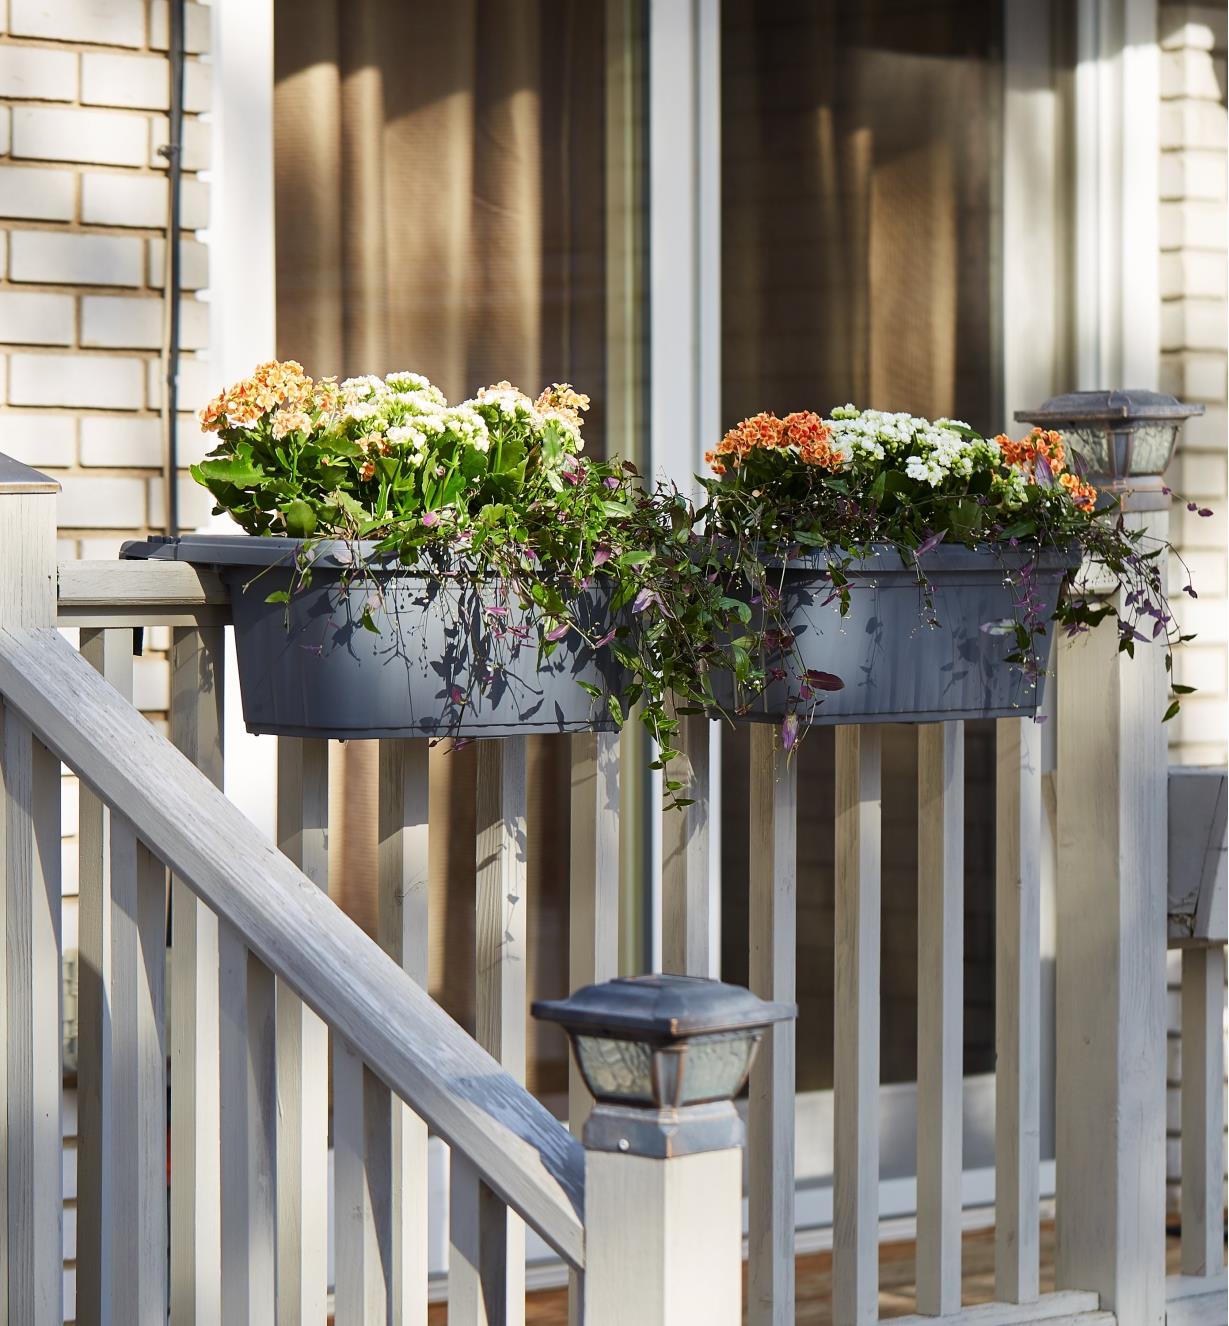 A pair of Fence and Railing Planters mounted on a porch railing